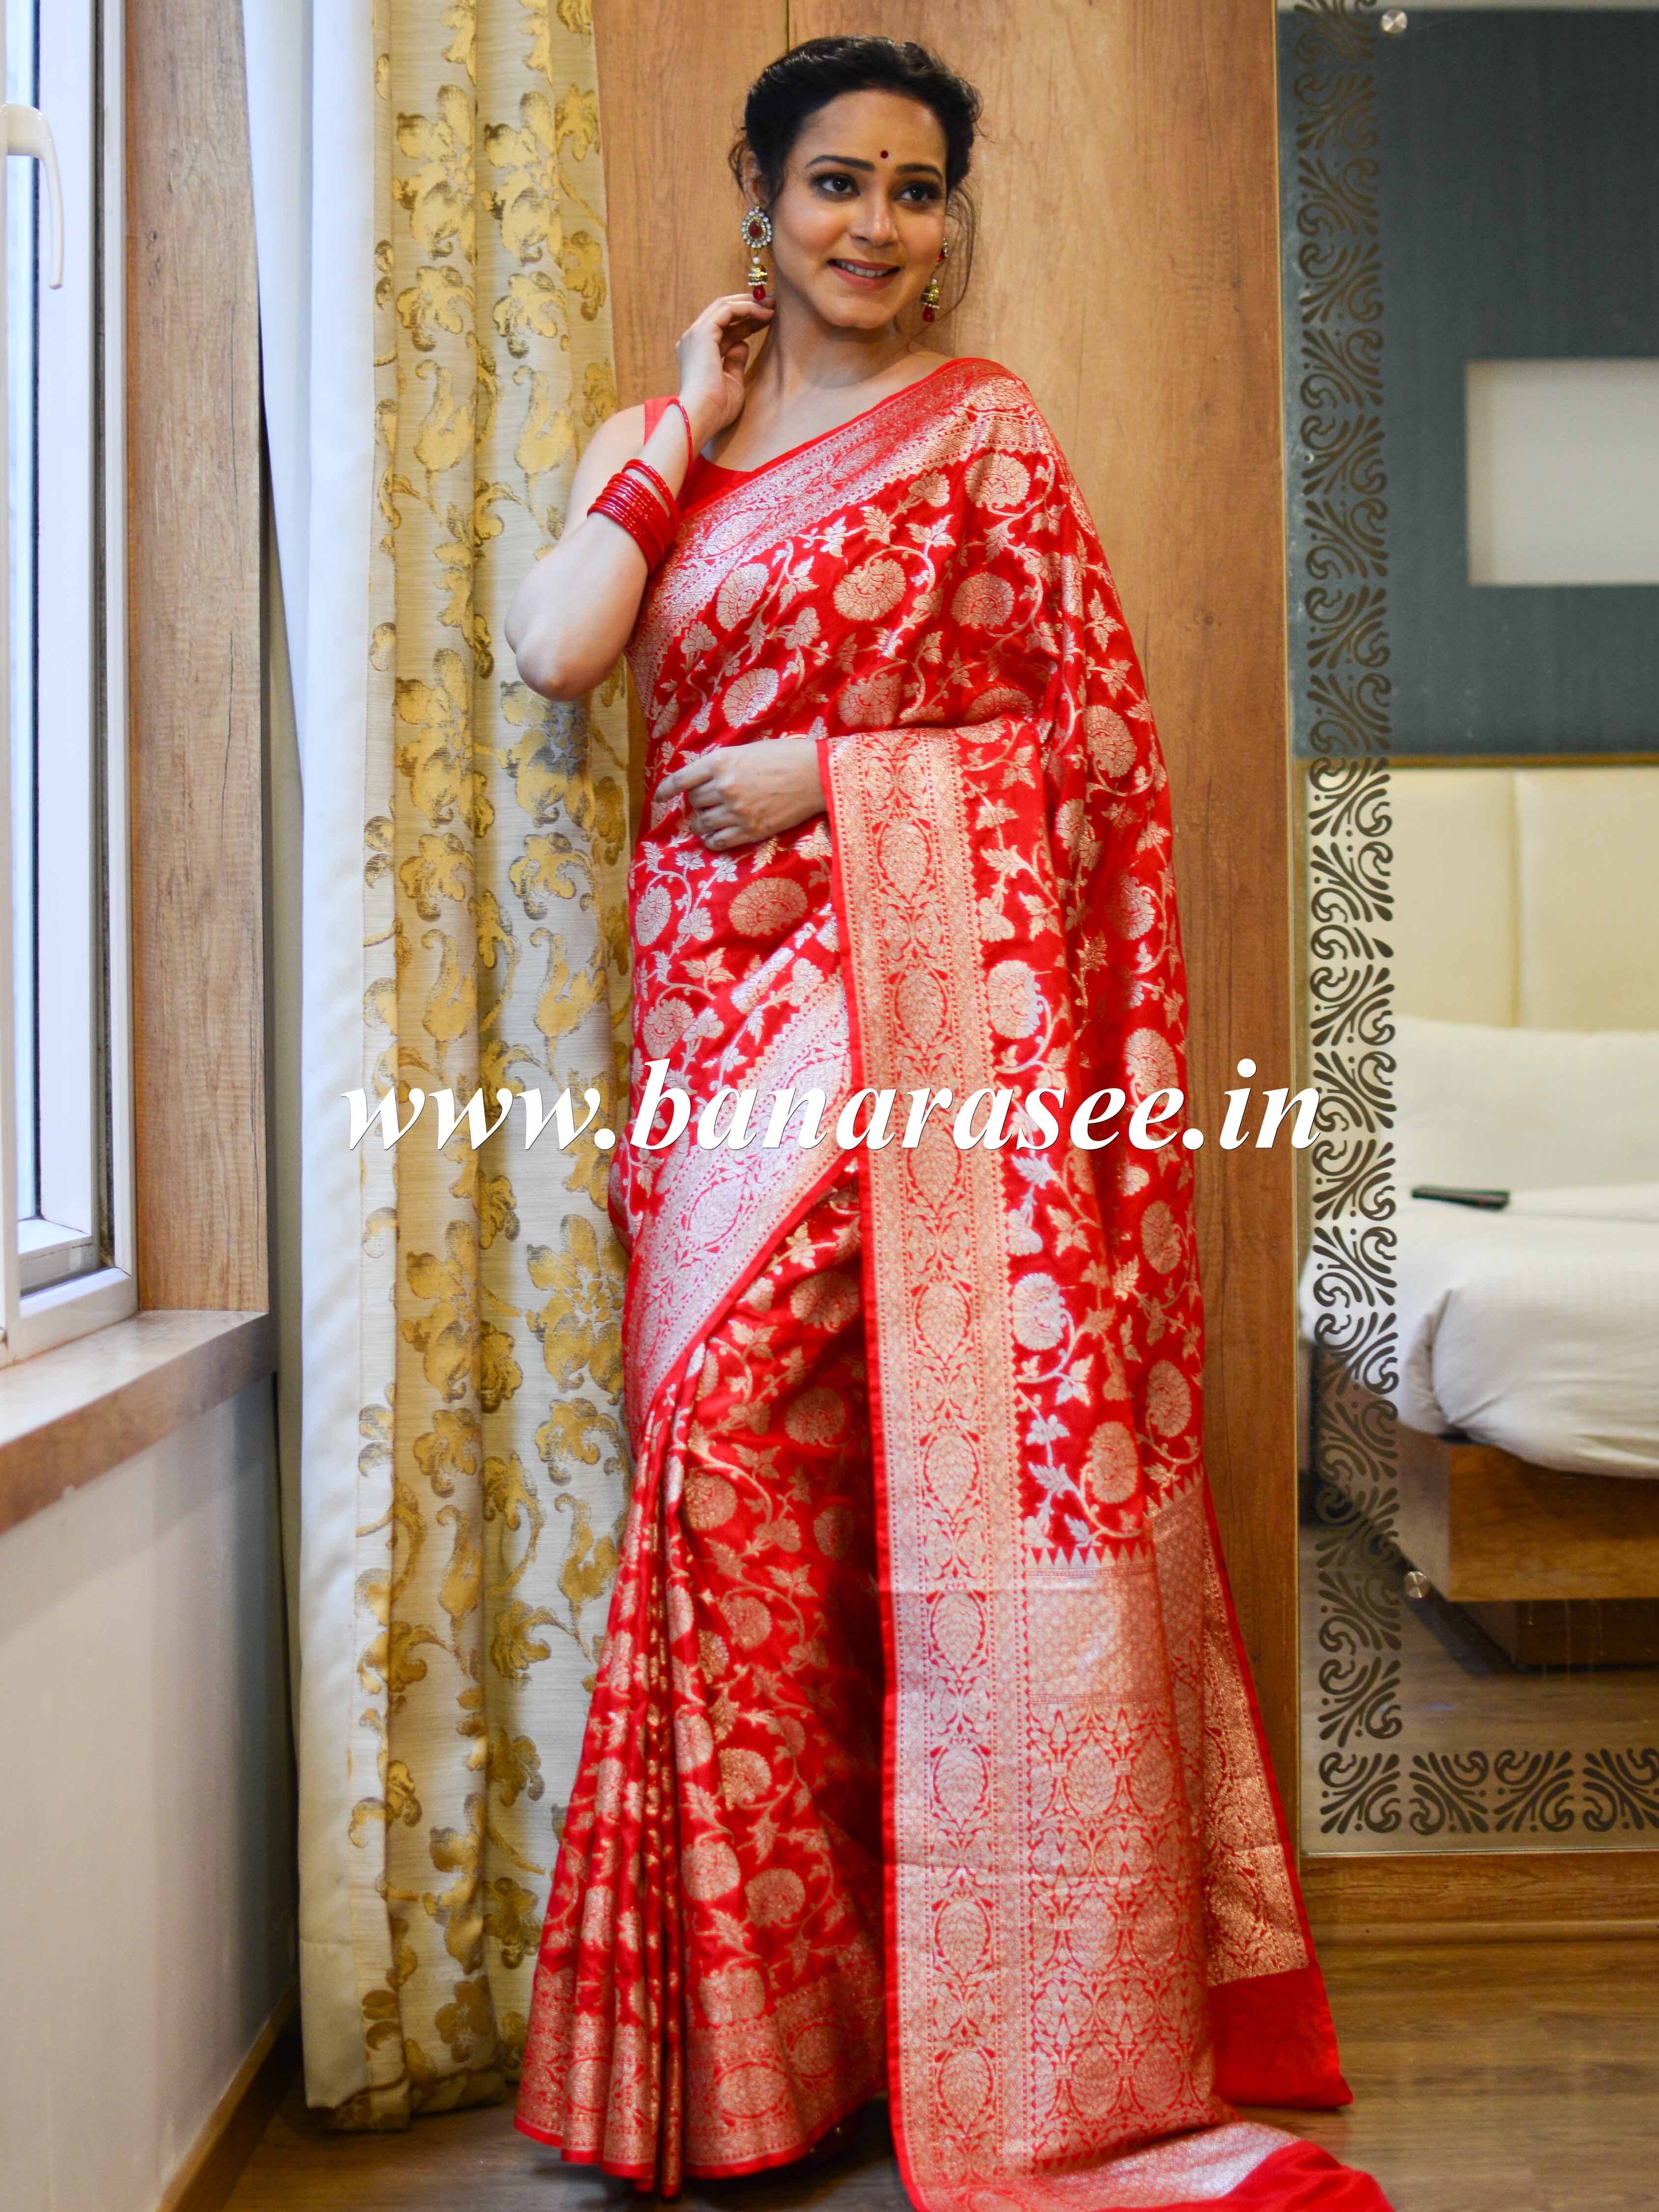 Banarasee Faux Georgette Saree With Gold Zari Jaal Work-Red